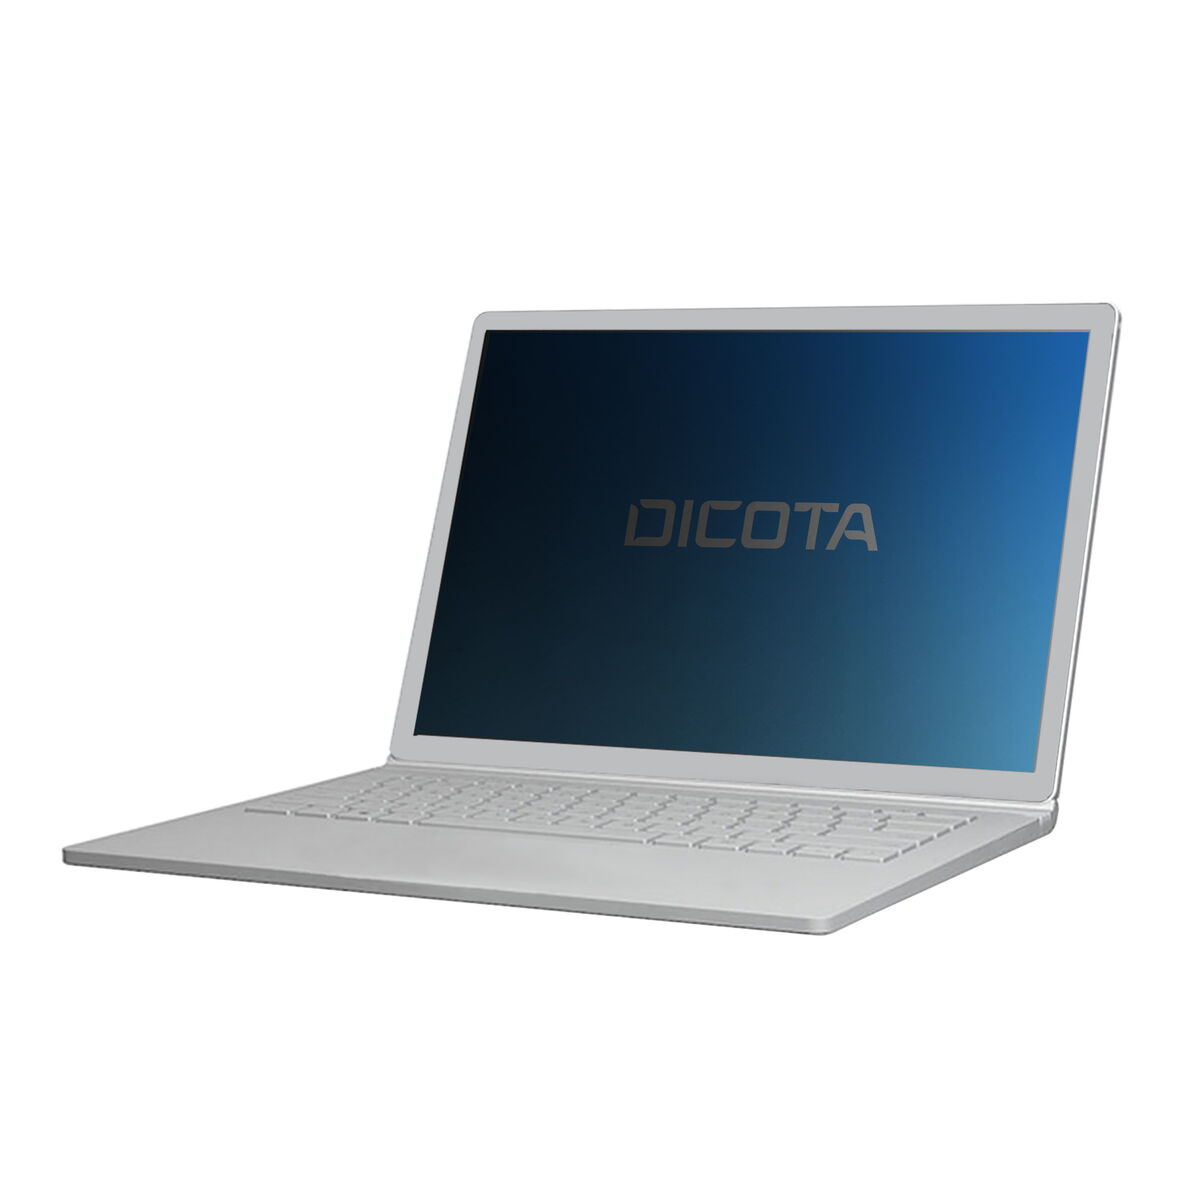 Privacy Filter for Monitor Dicota D32010